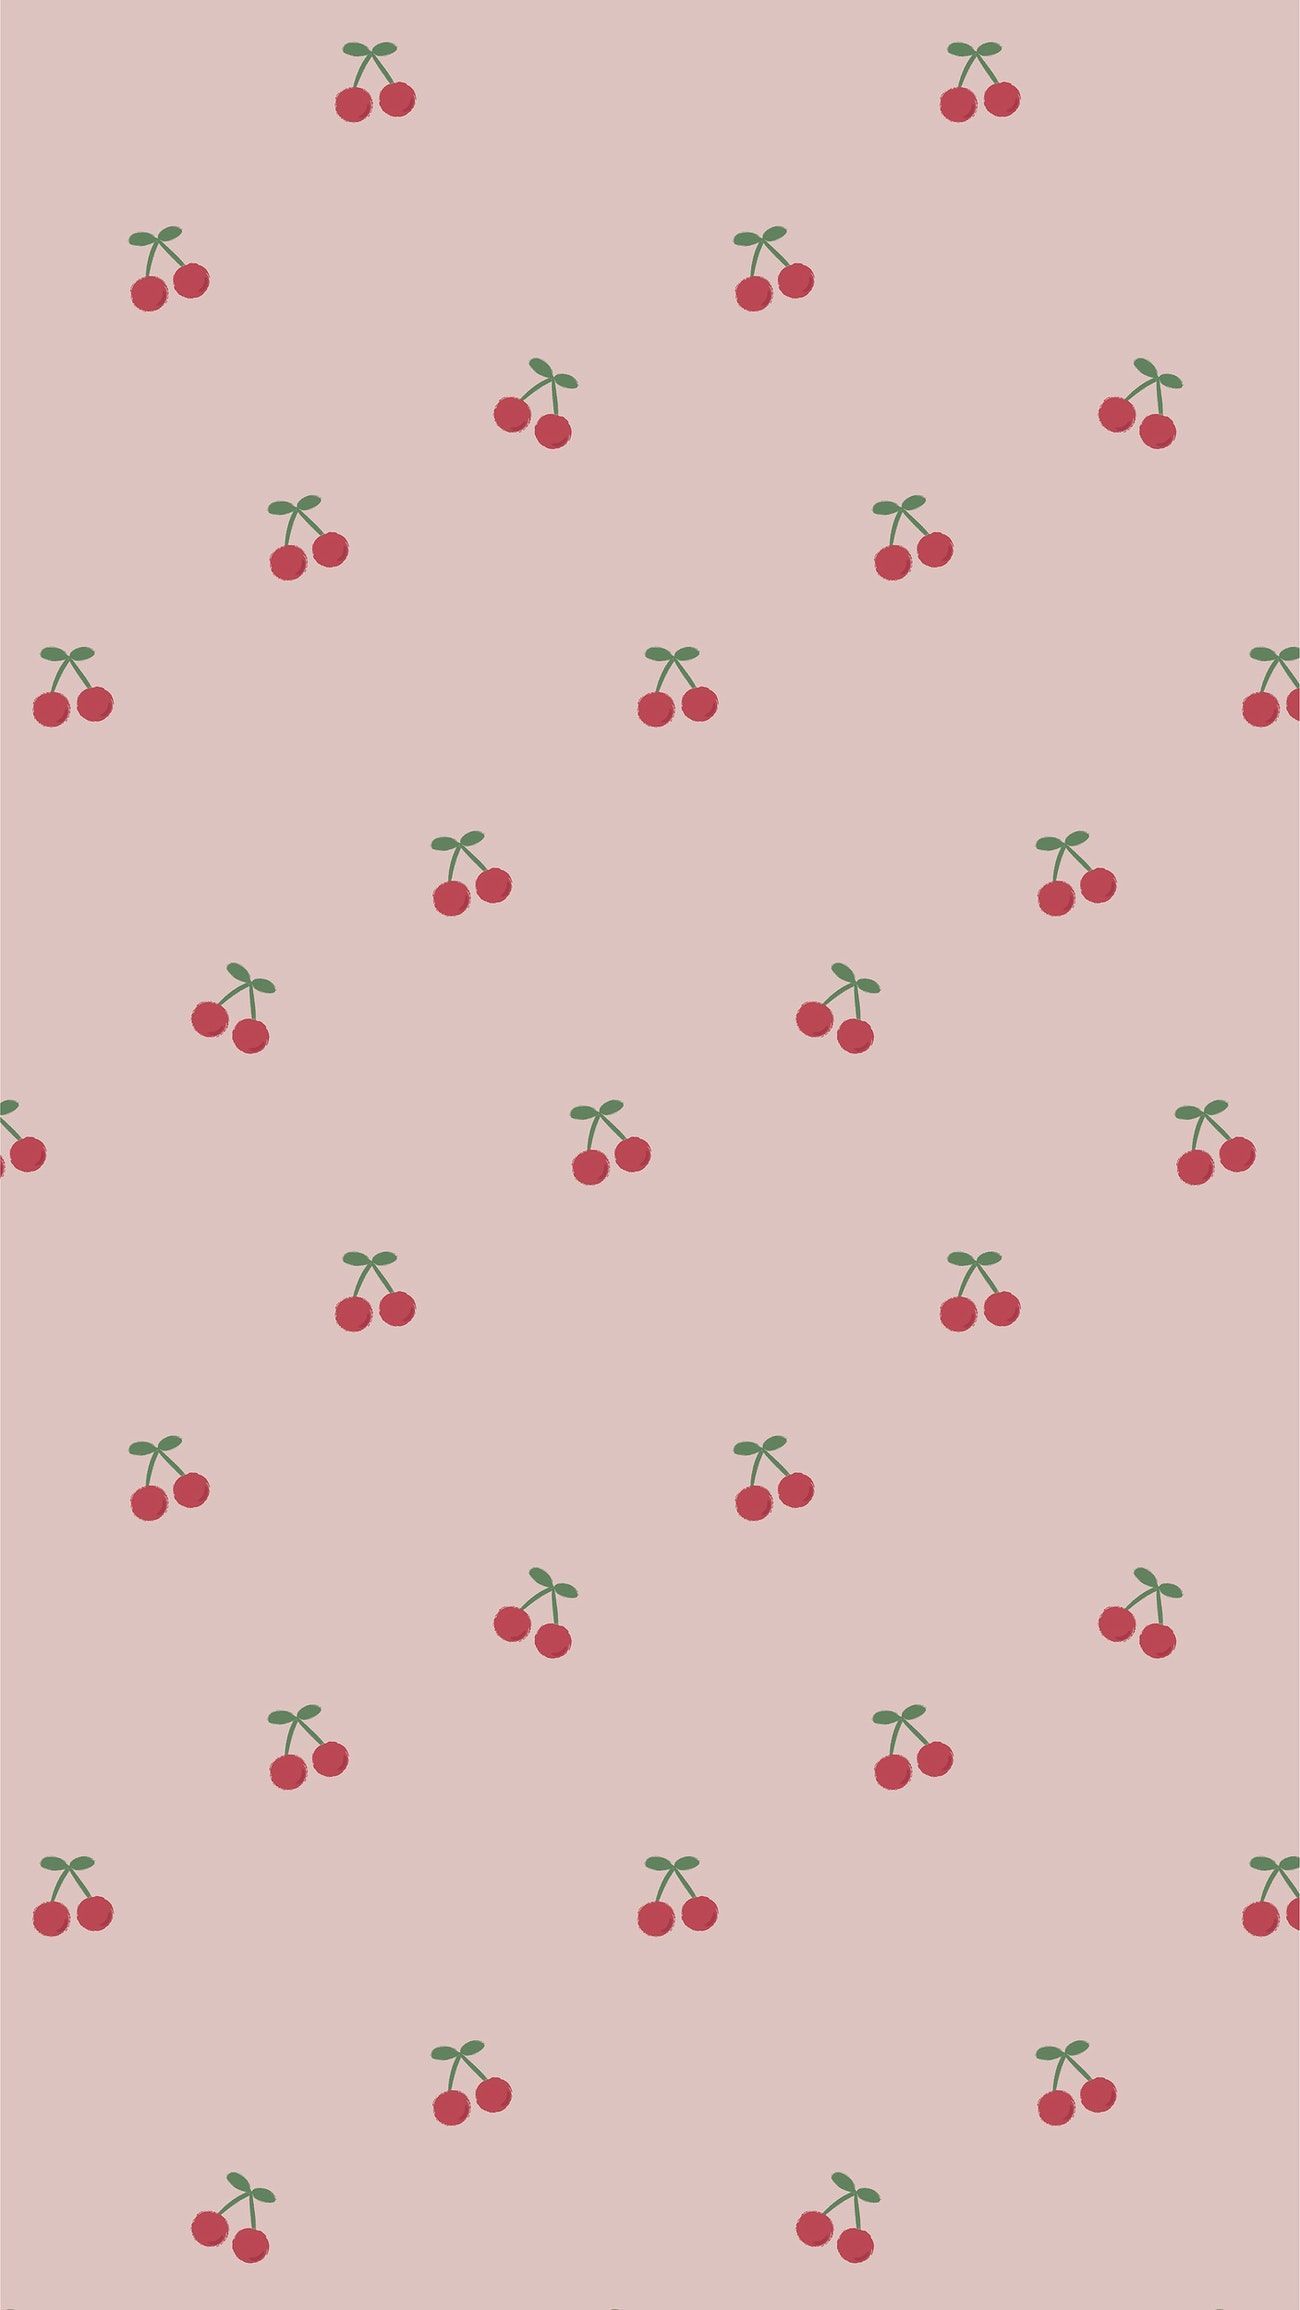 Cherry blossom fabric by the yard - Cherry